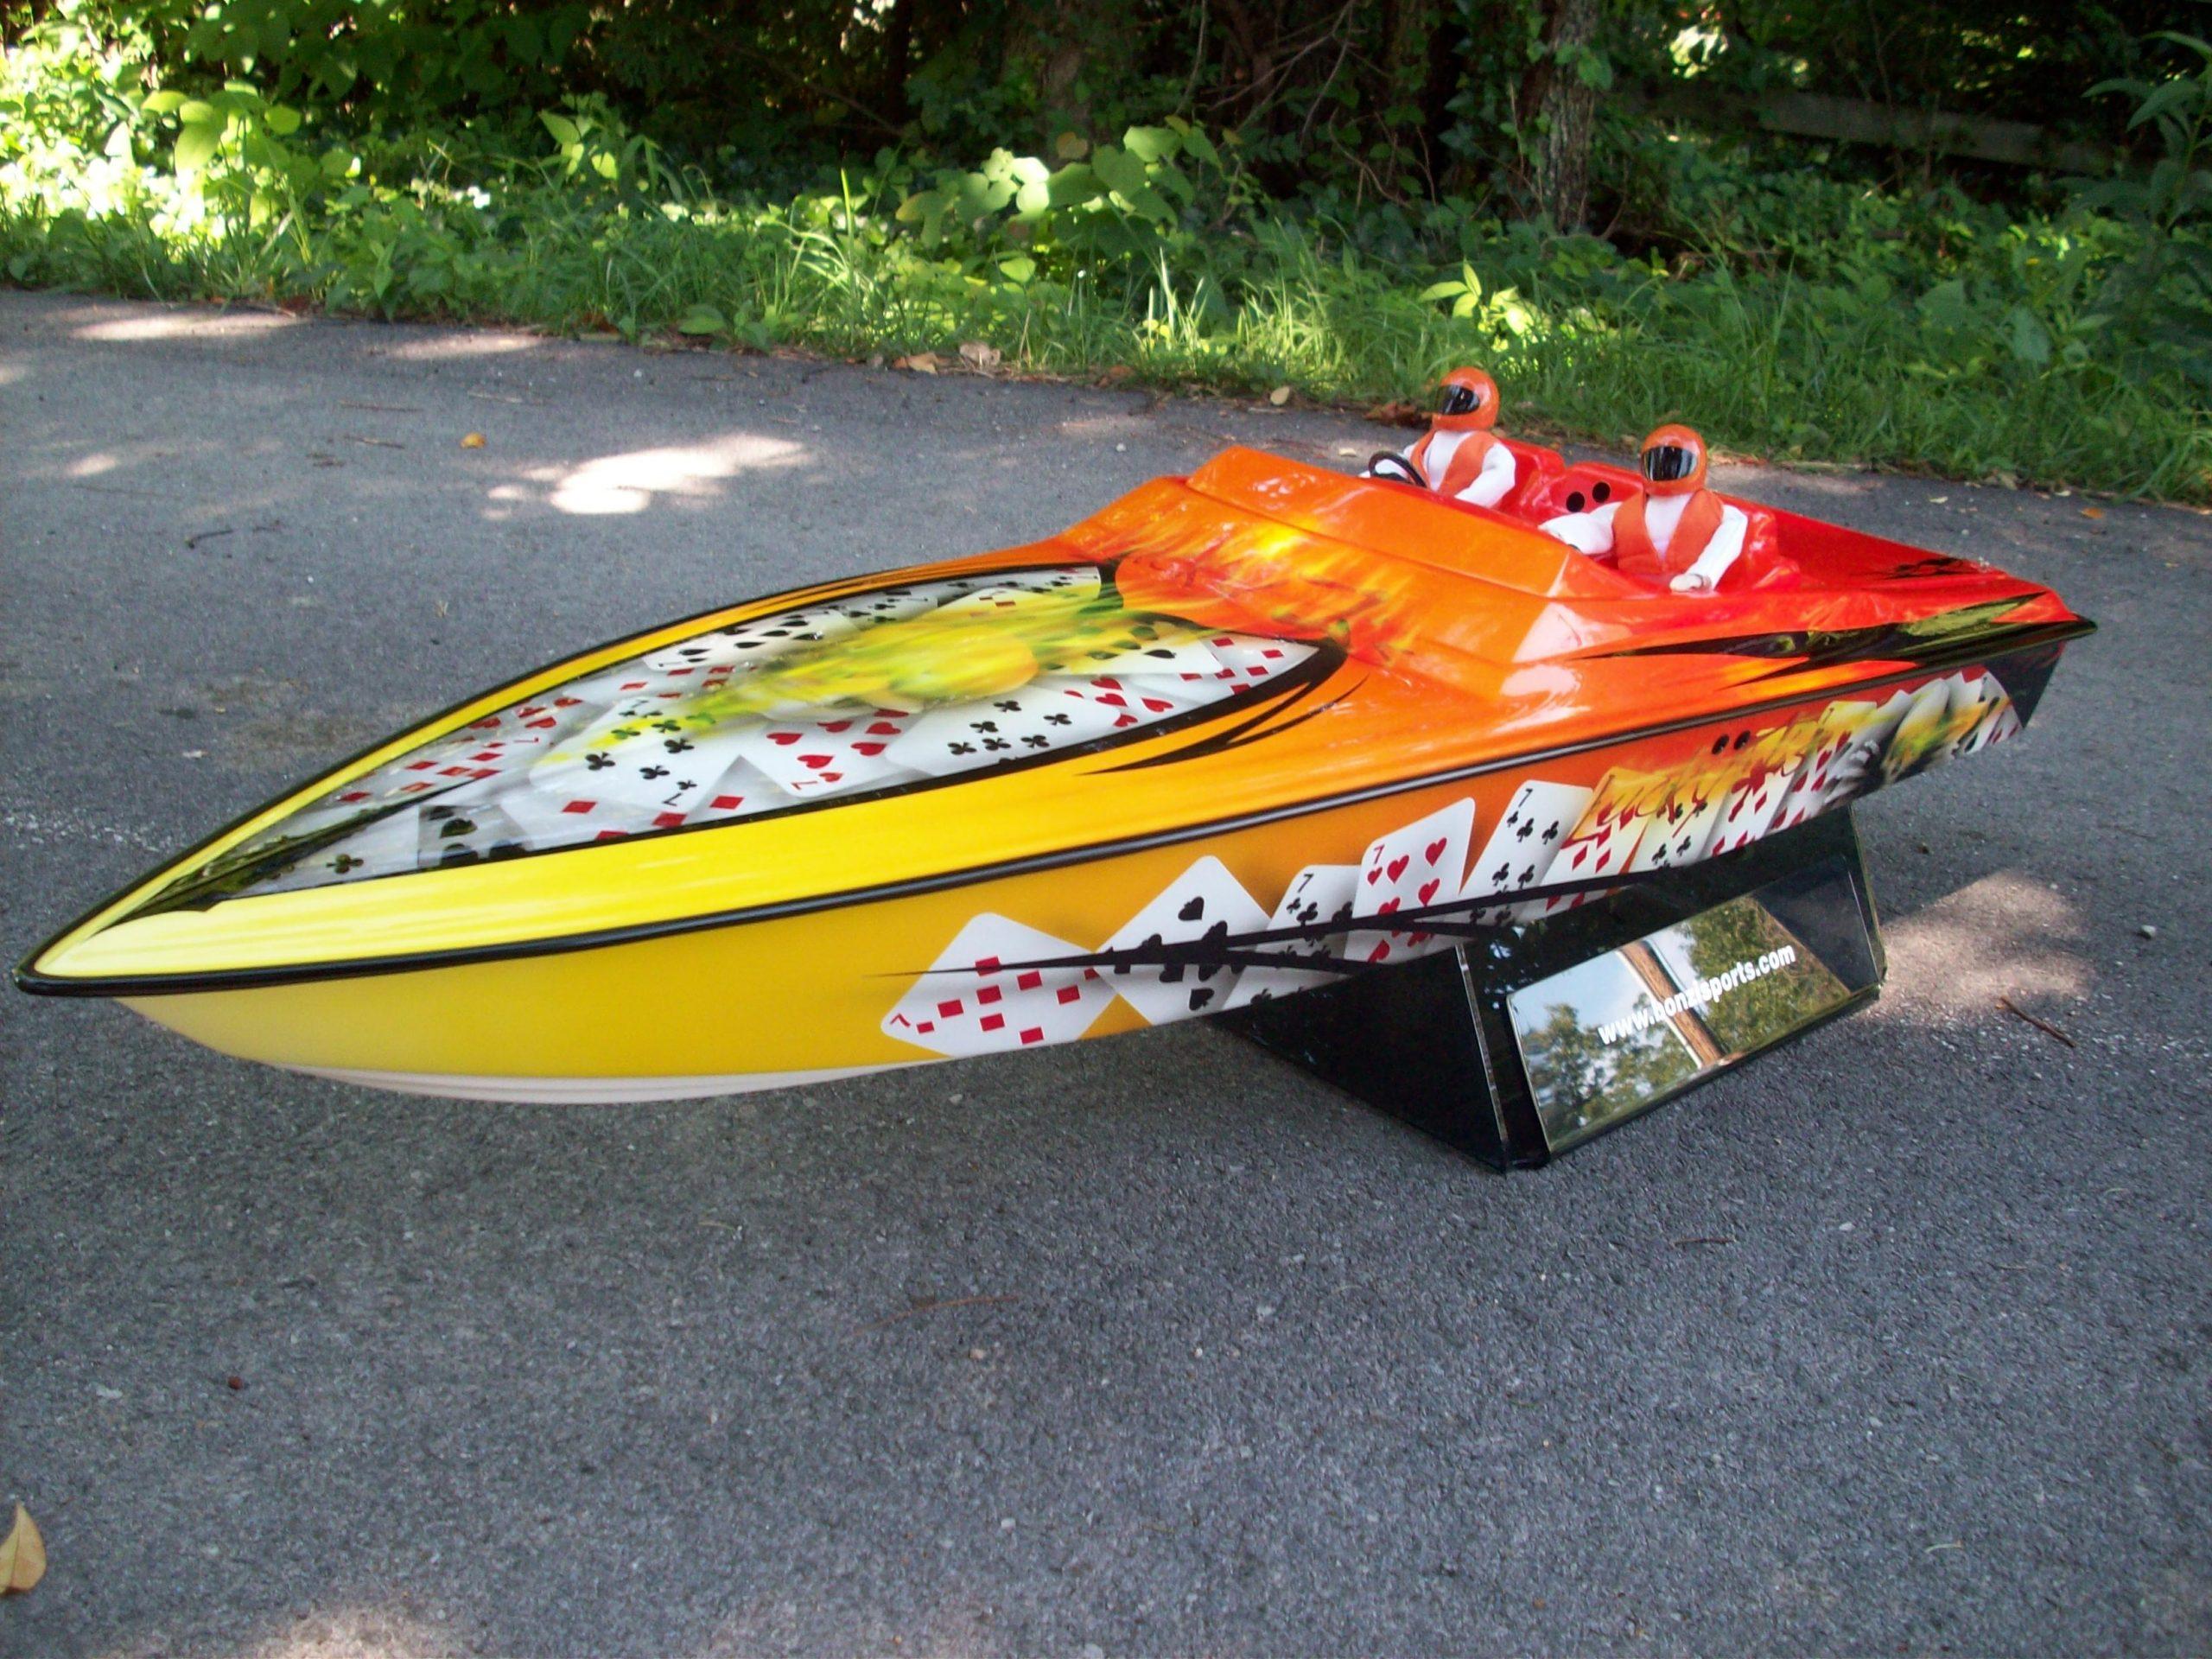 Used Bonzi Rc Boats For Sale: Things to Keep in Mind When Buying a Used Bonzi RC Boat